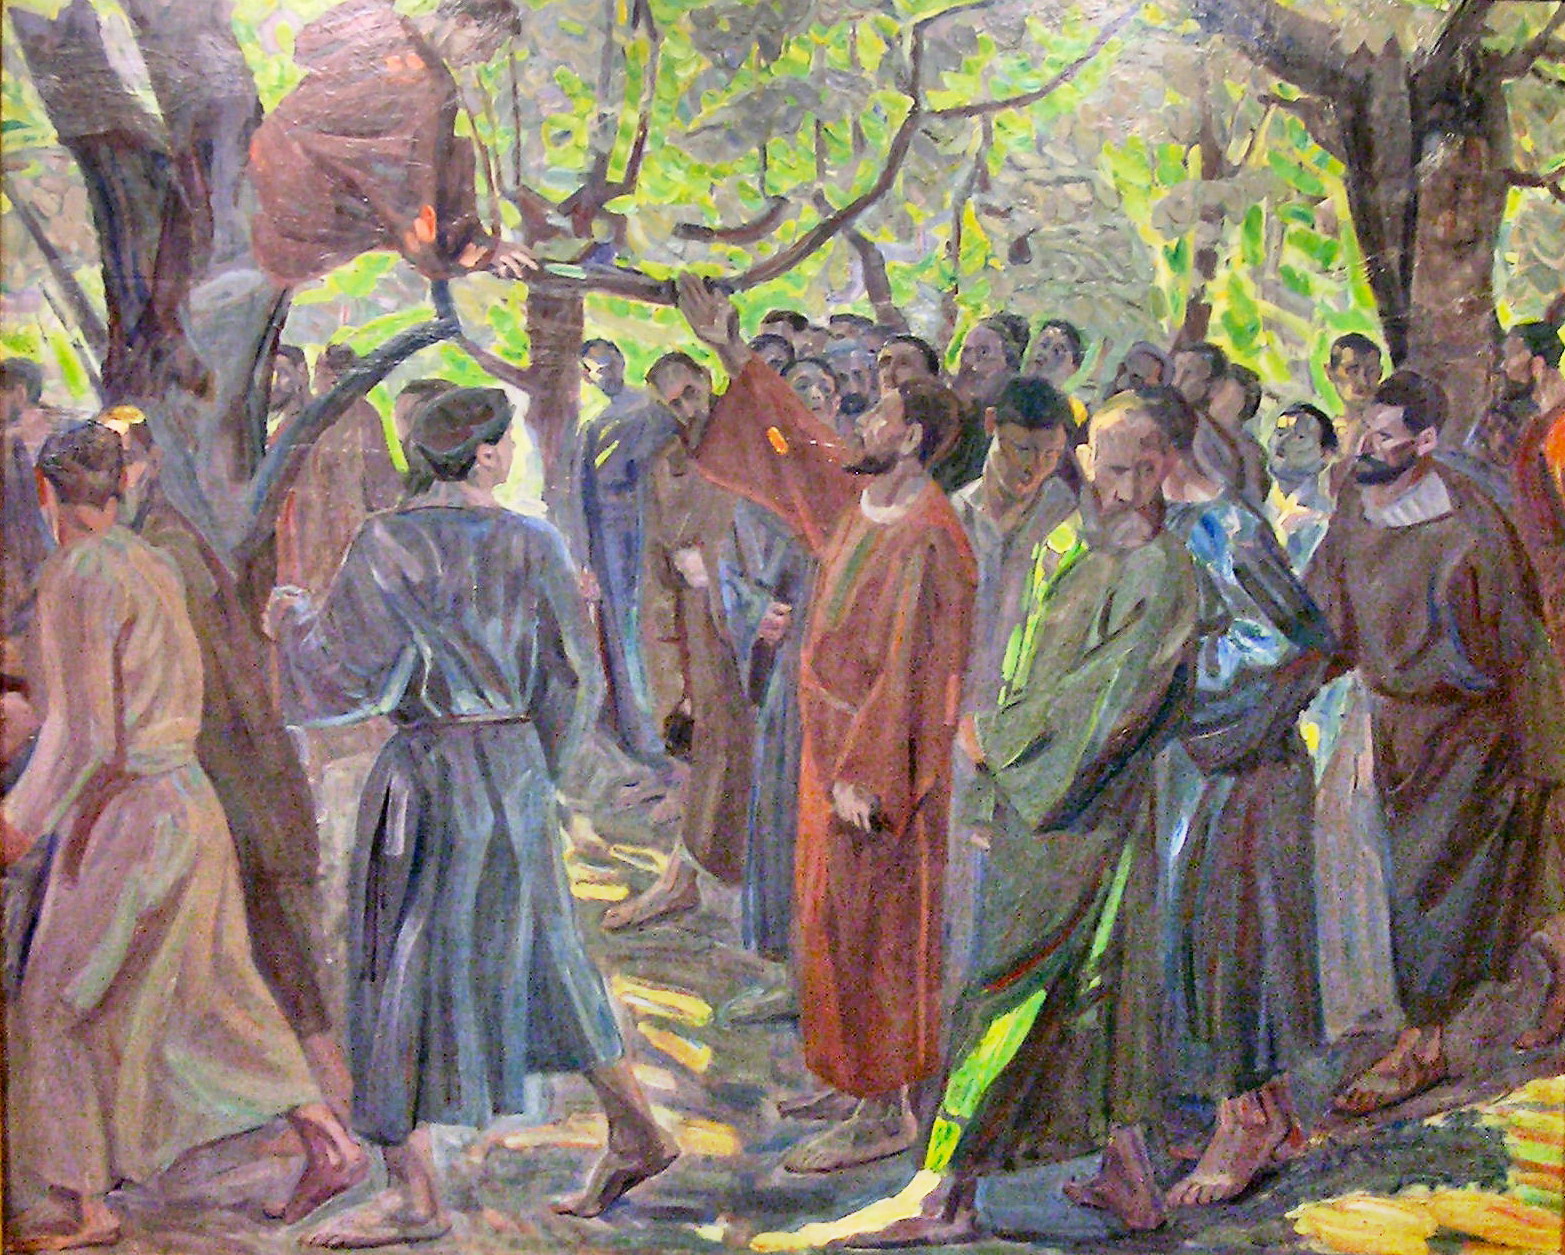 Mary Helps Zacchaeus and Helps Us Get Close to Jesus